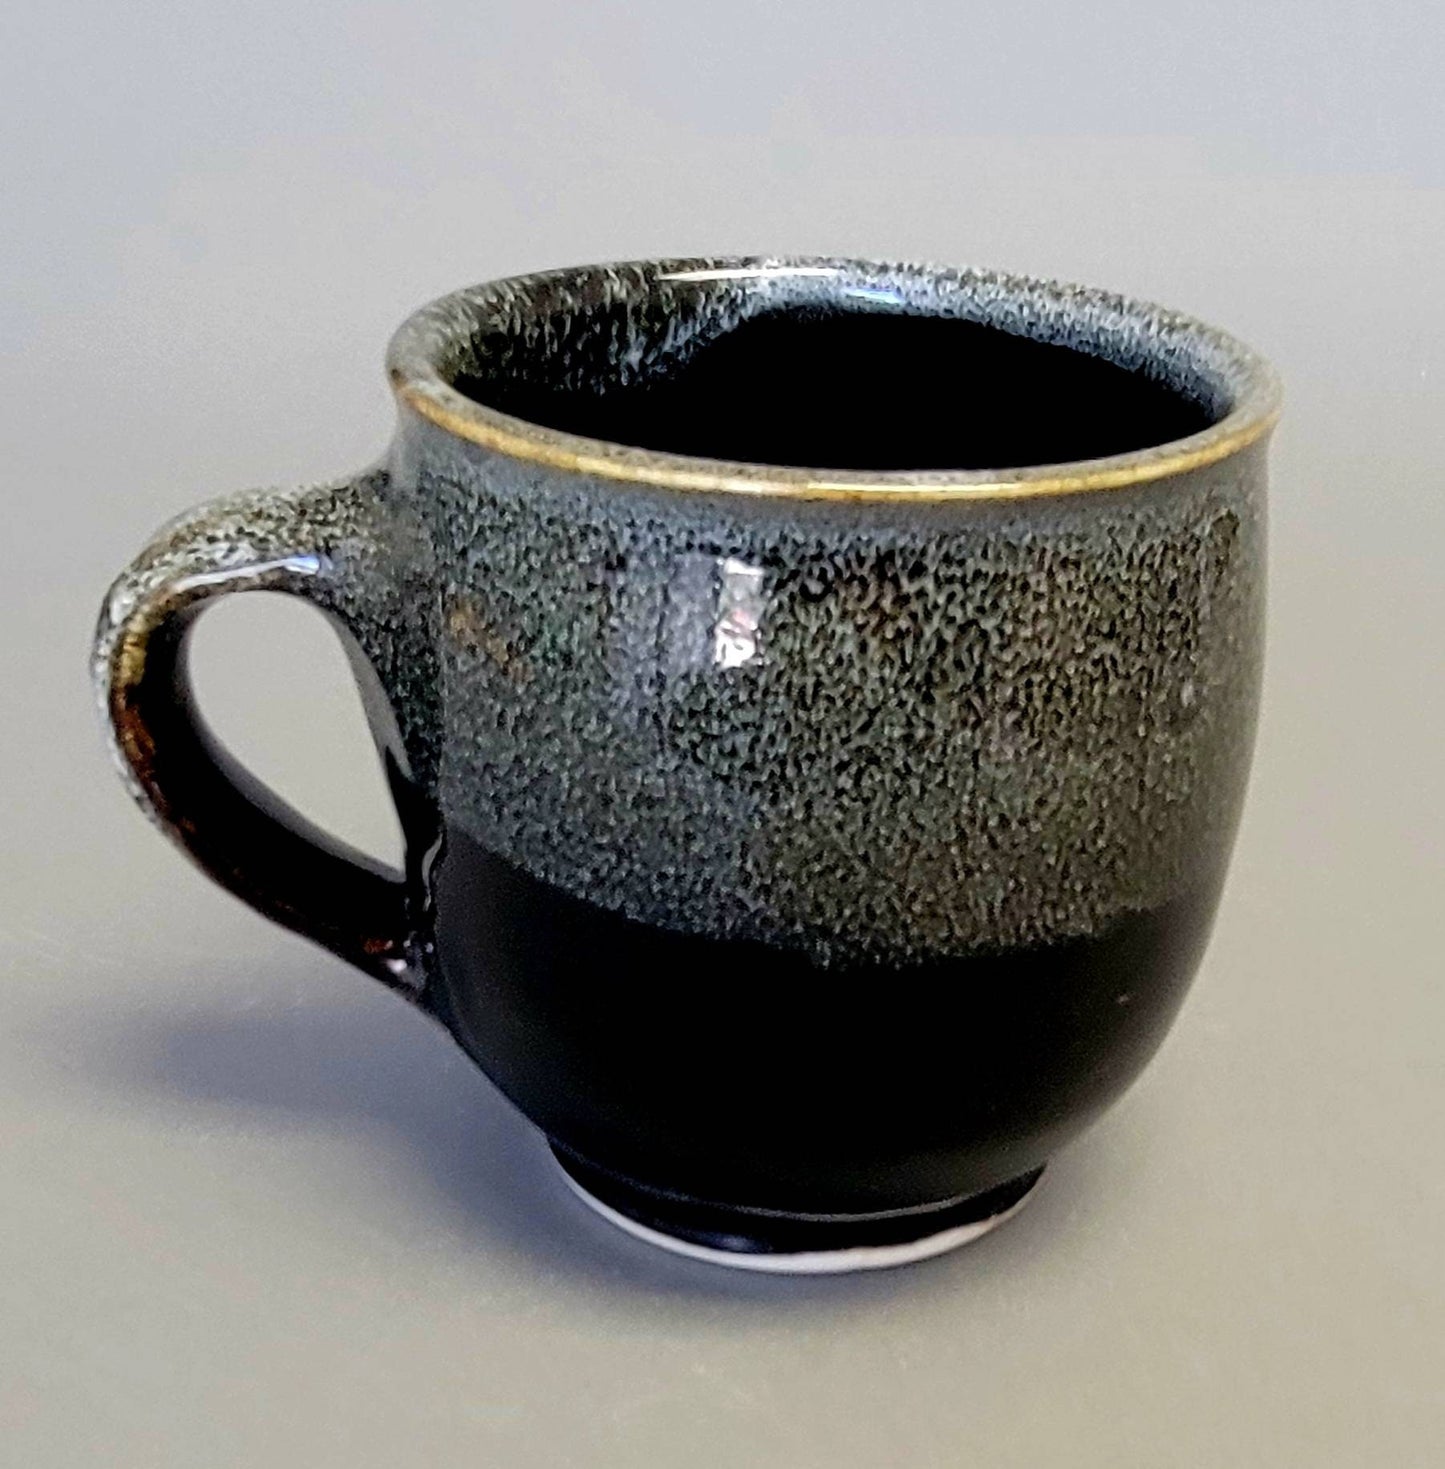 Handmade Pottery Coffee Mug in Black and White Speckles - Ceramic Farmhouse Style Decor Cup with Handle